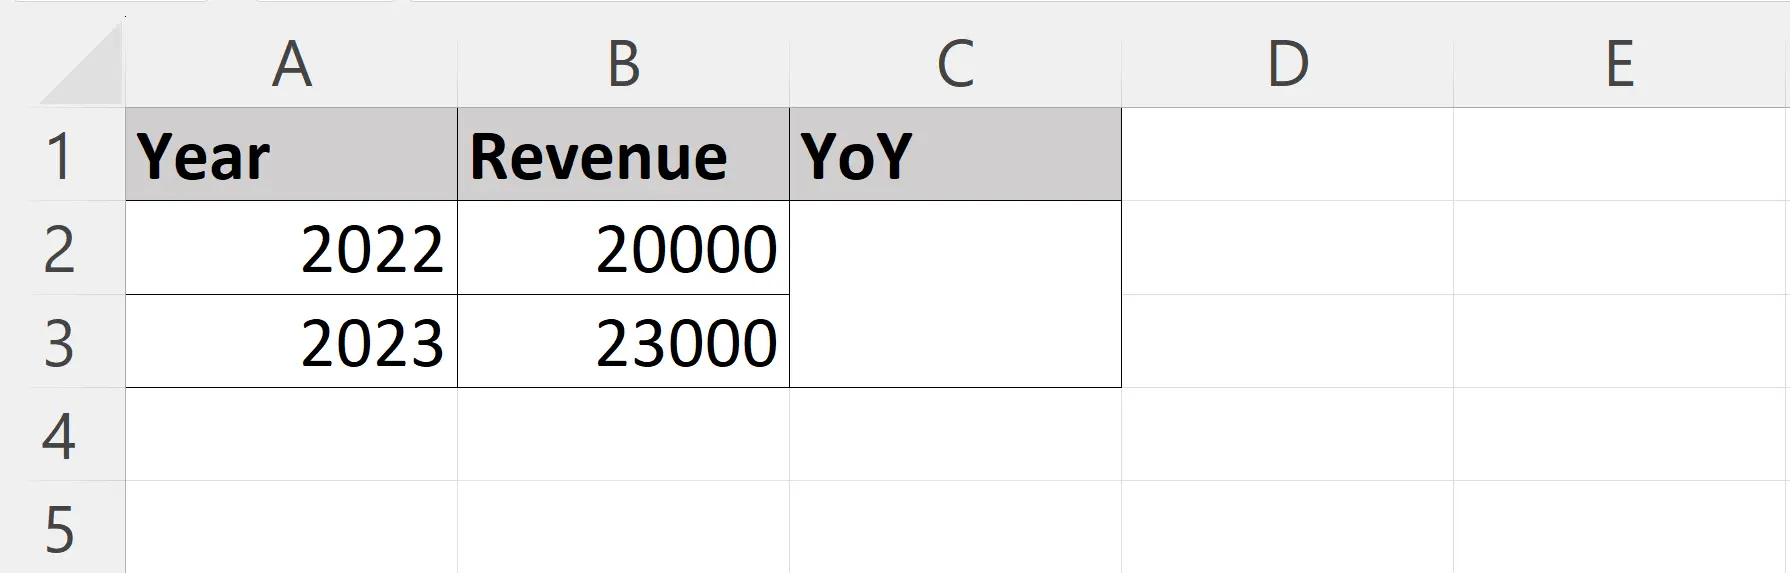 How to calculate yoy in excel - step by step guide - step 1 - prepare data table - screenshot from Excel by author